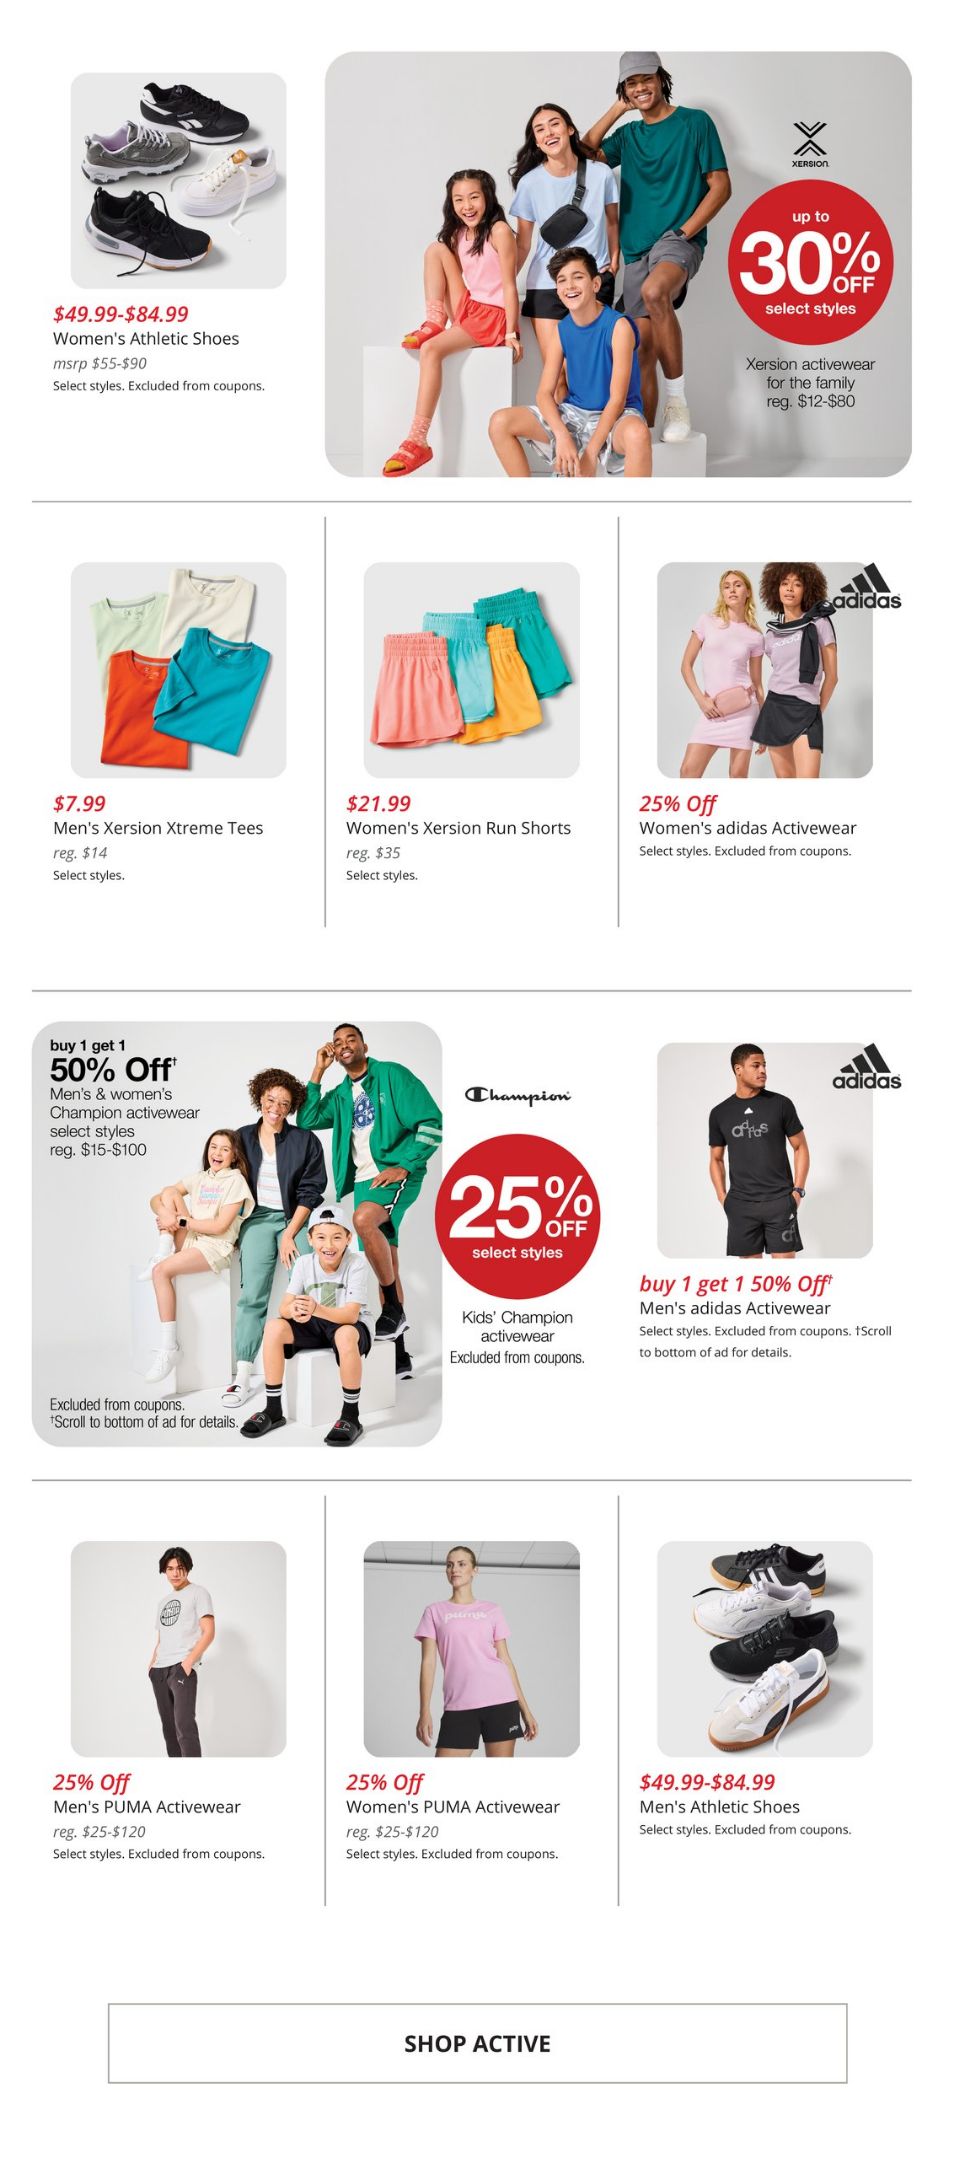 Weekly ad JC Penney 05/16/2024 - 05/19/2024